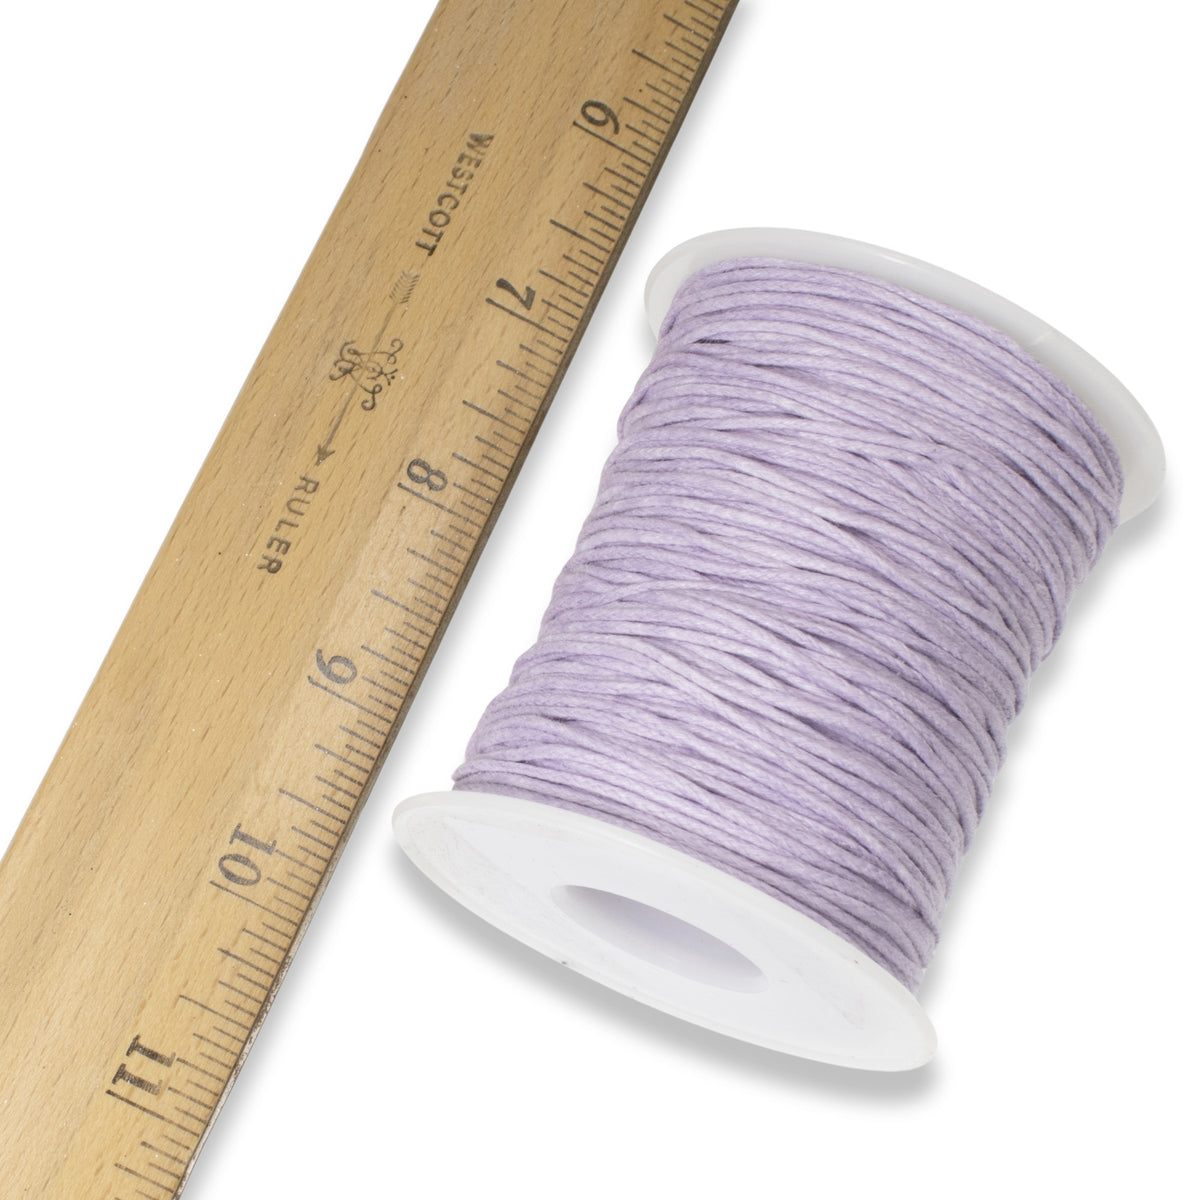 Xsotica Round Cotton Waxed Cord 1 mm, Women's, Size: 100 Meter, Purple